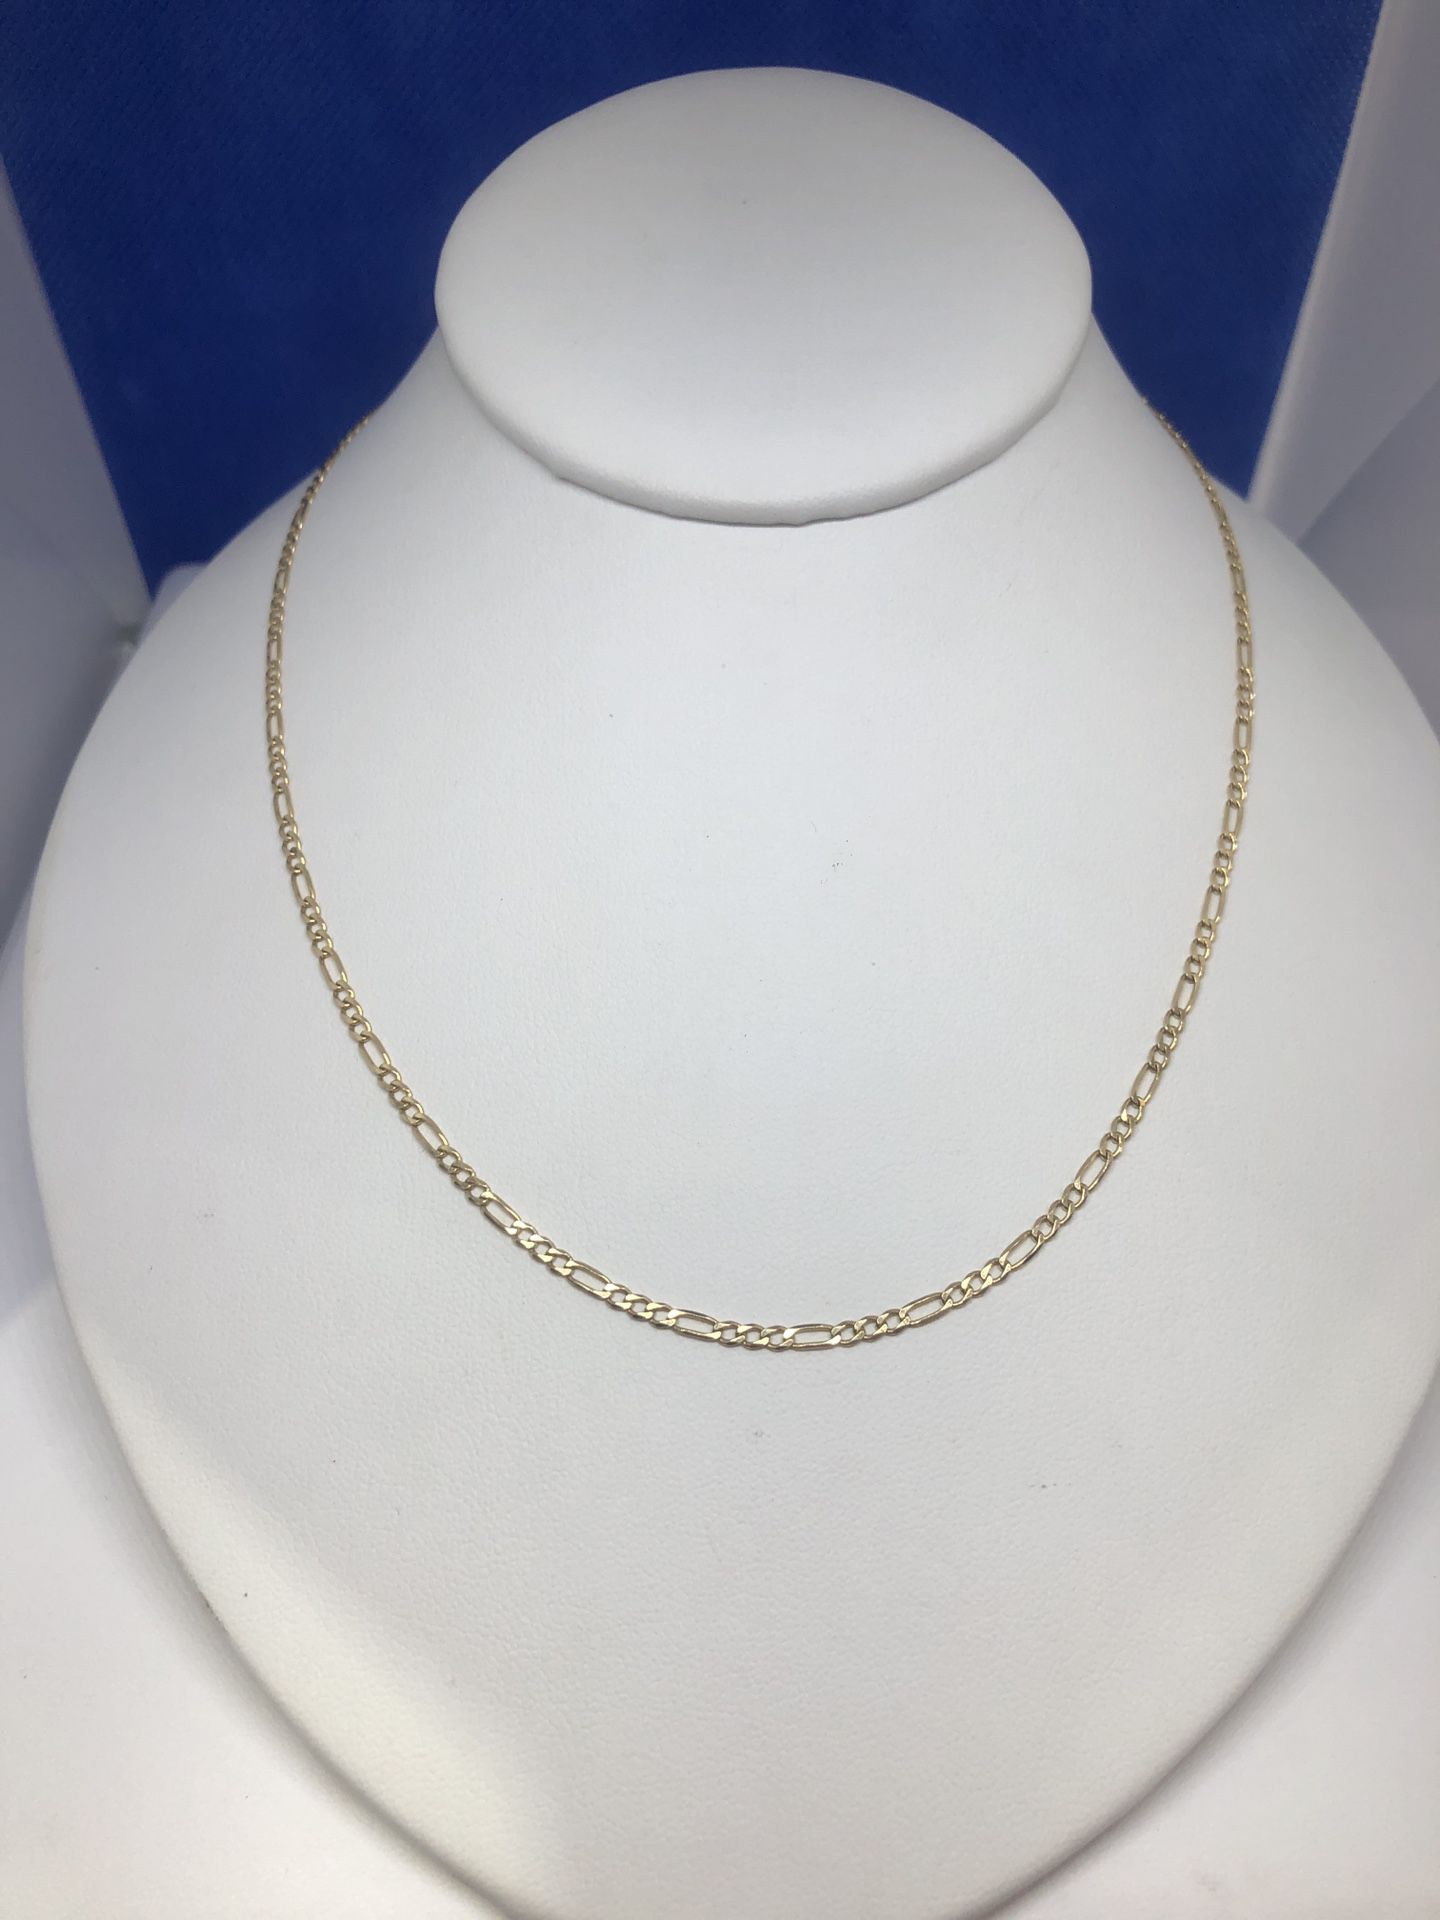 Awesome 14k Gold Figaro Link Chain 24"